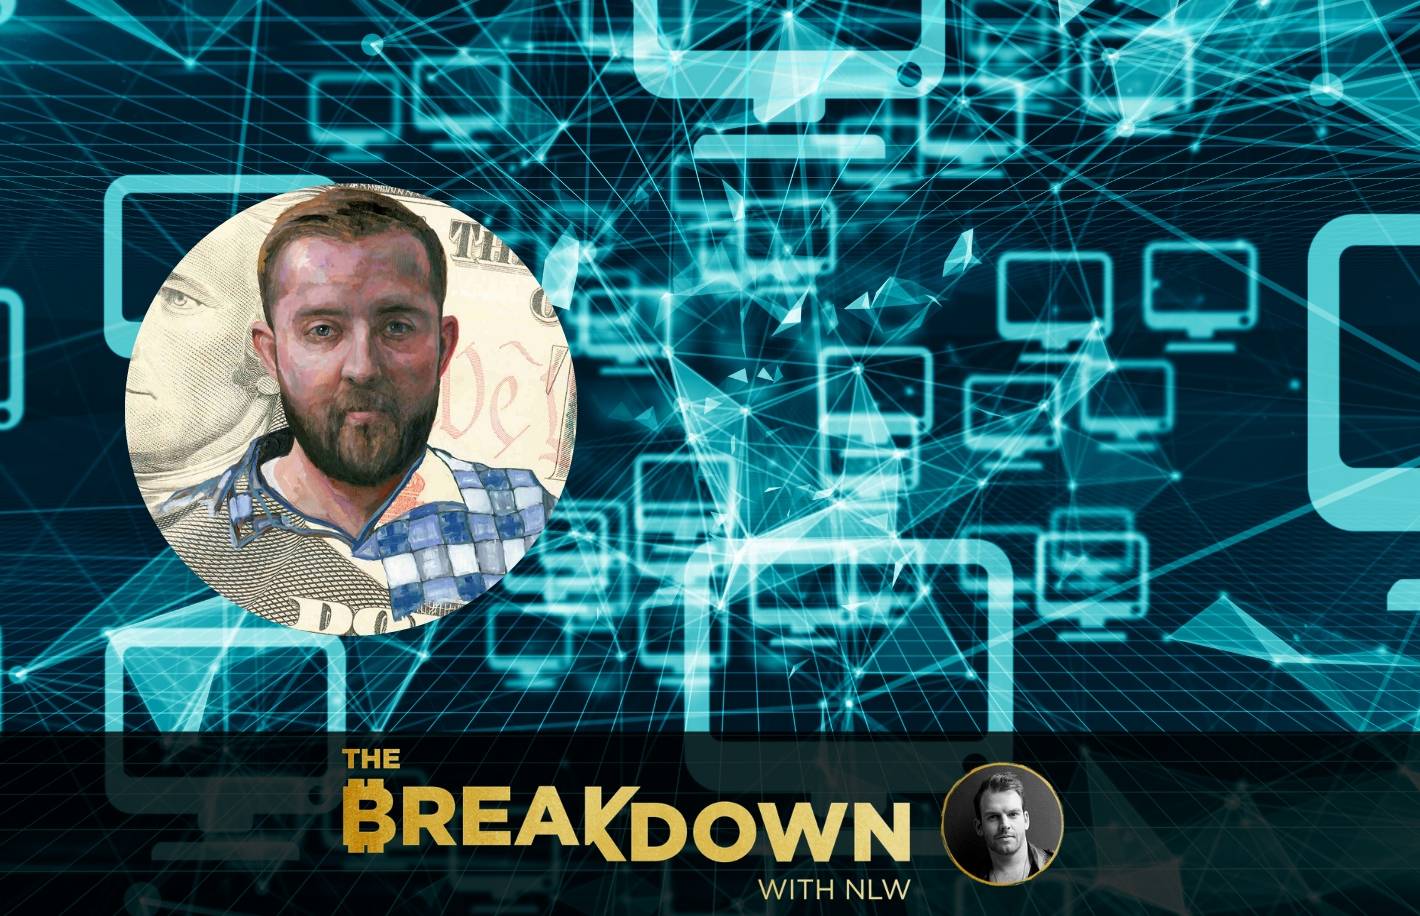 Chainlink’s-sergey-nazarov-on-what-defi-can-learn-from-early-exchange-hacks